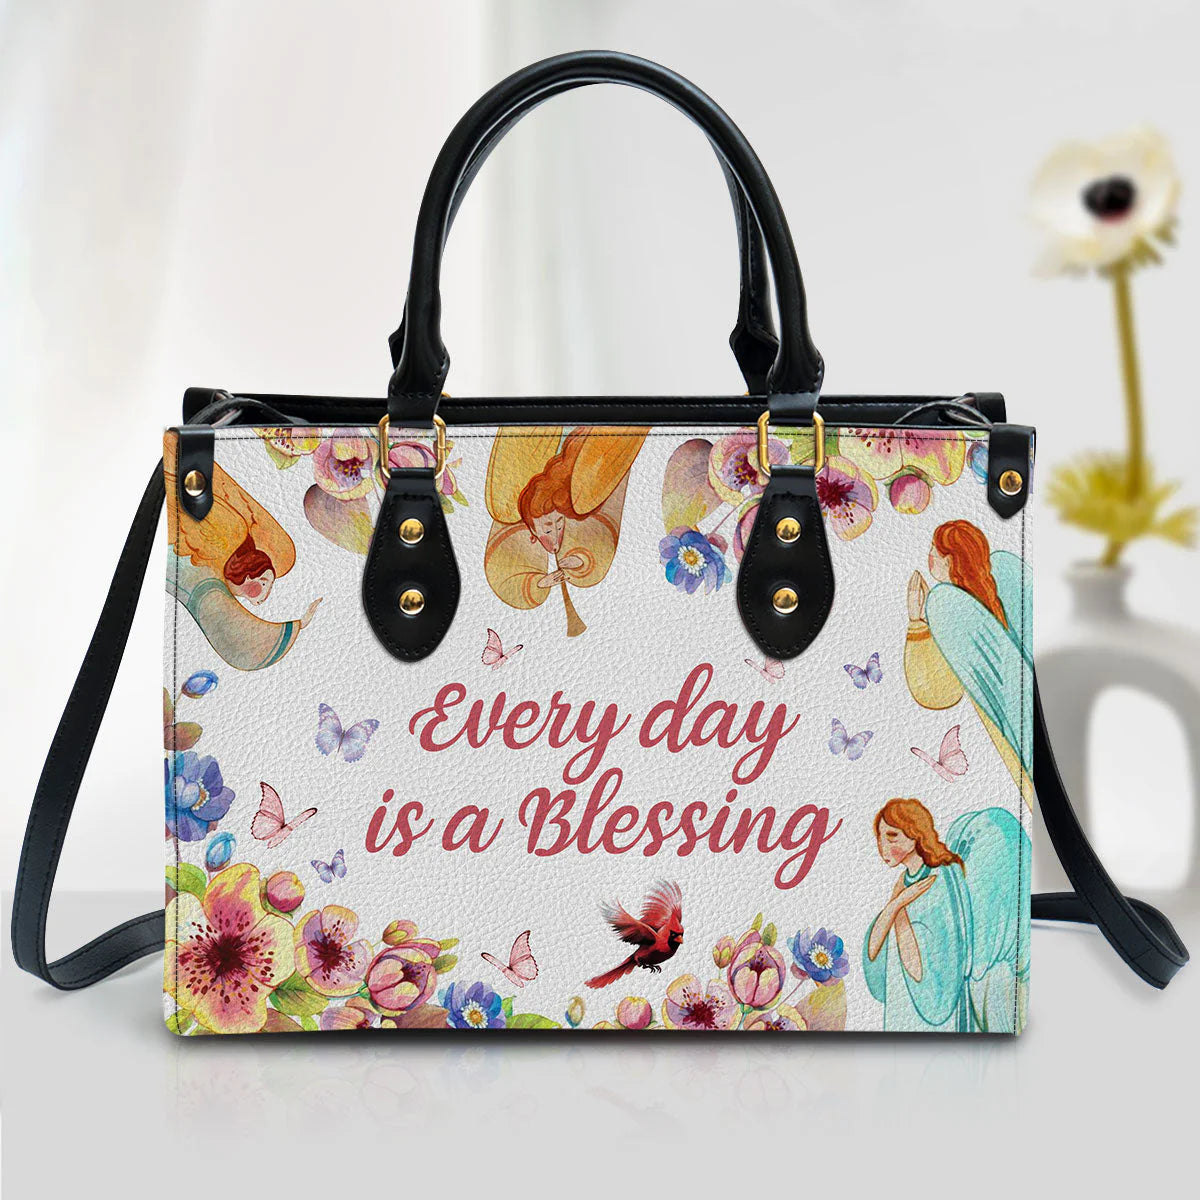 Christianartbag Handbag, Every Day Is A Blessing, Personalized Gifts, Gifts for Women, Christmas Gift. - Christian Art Bag